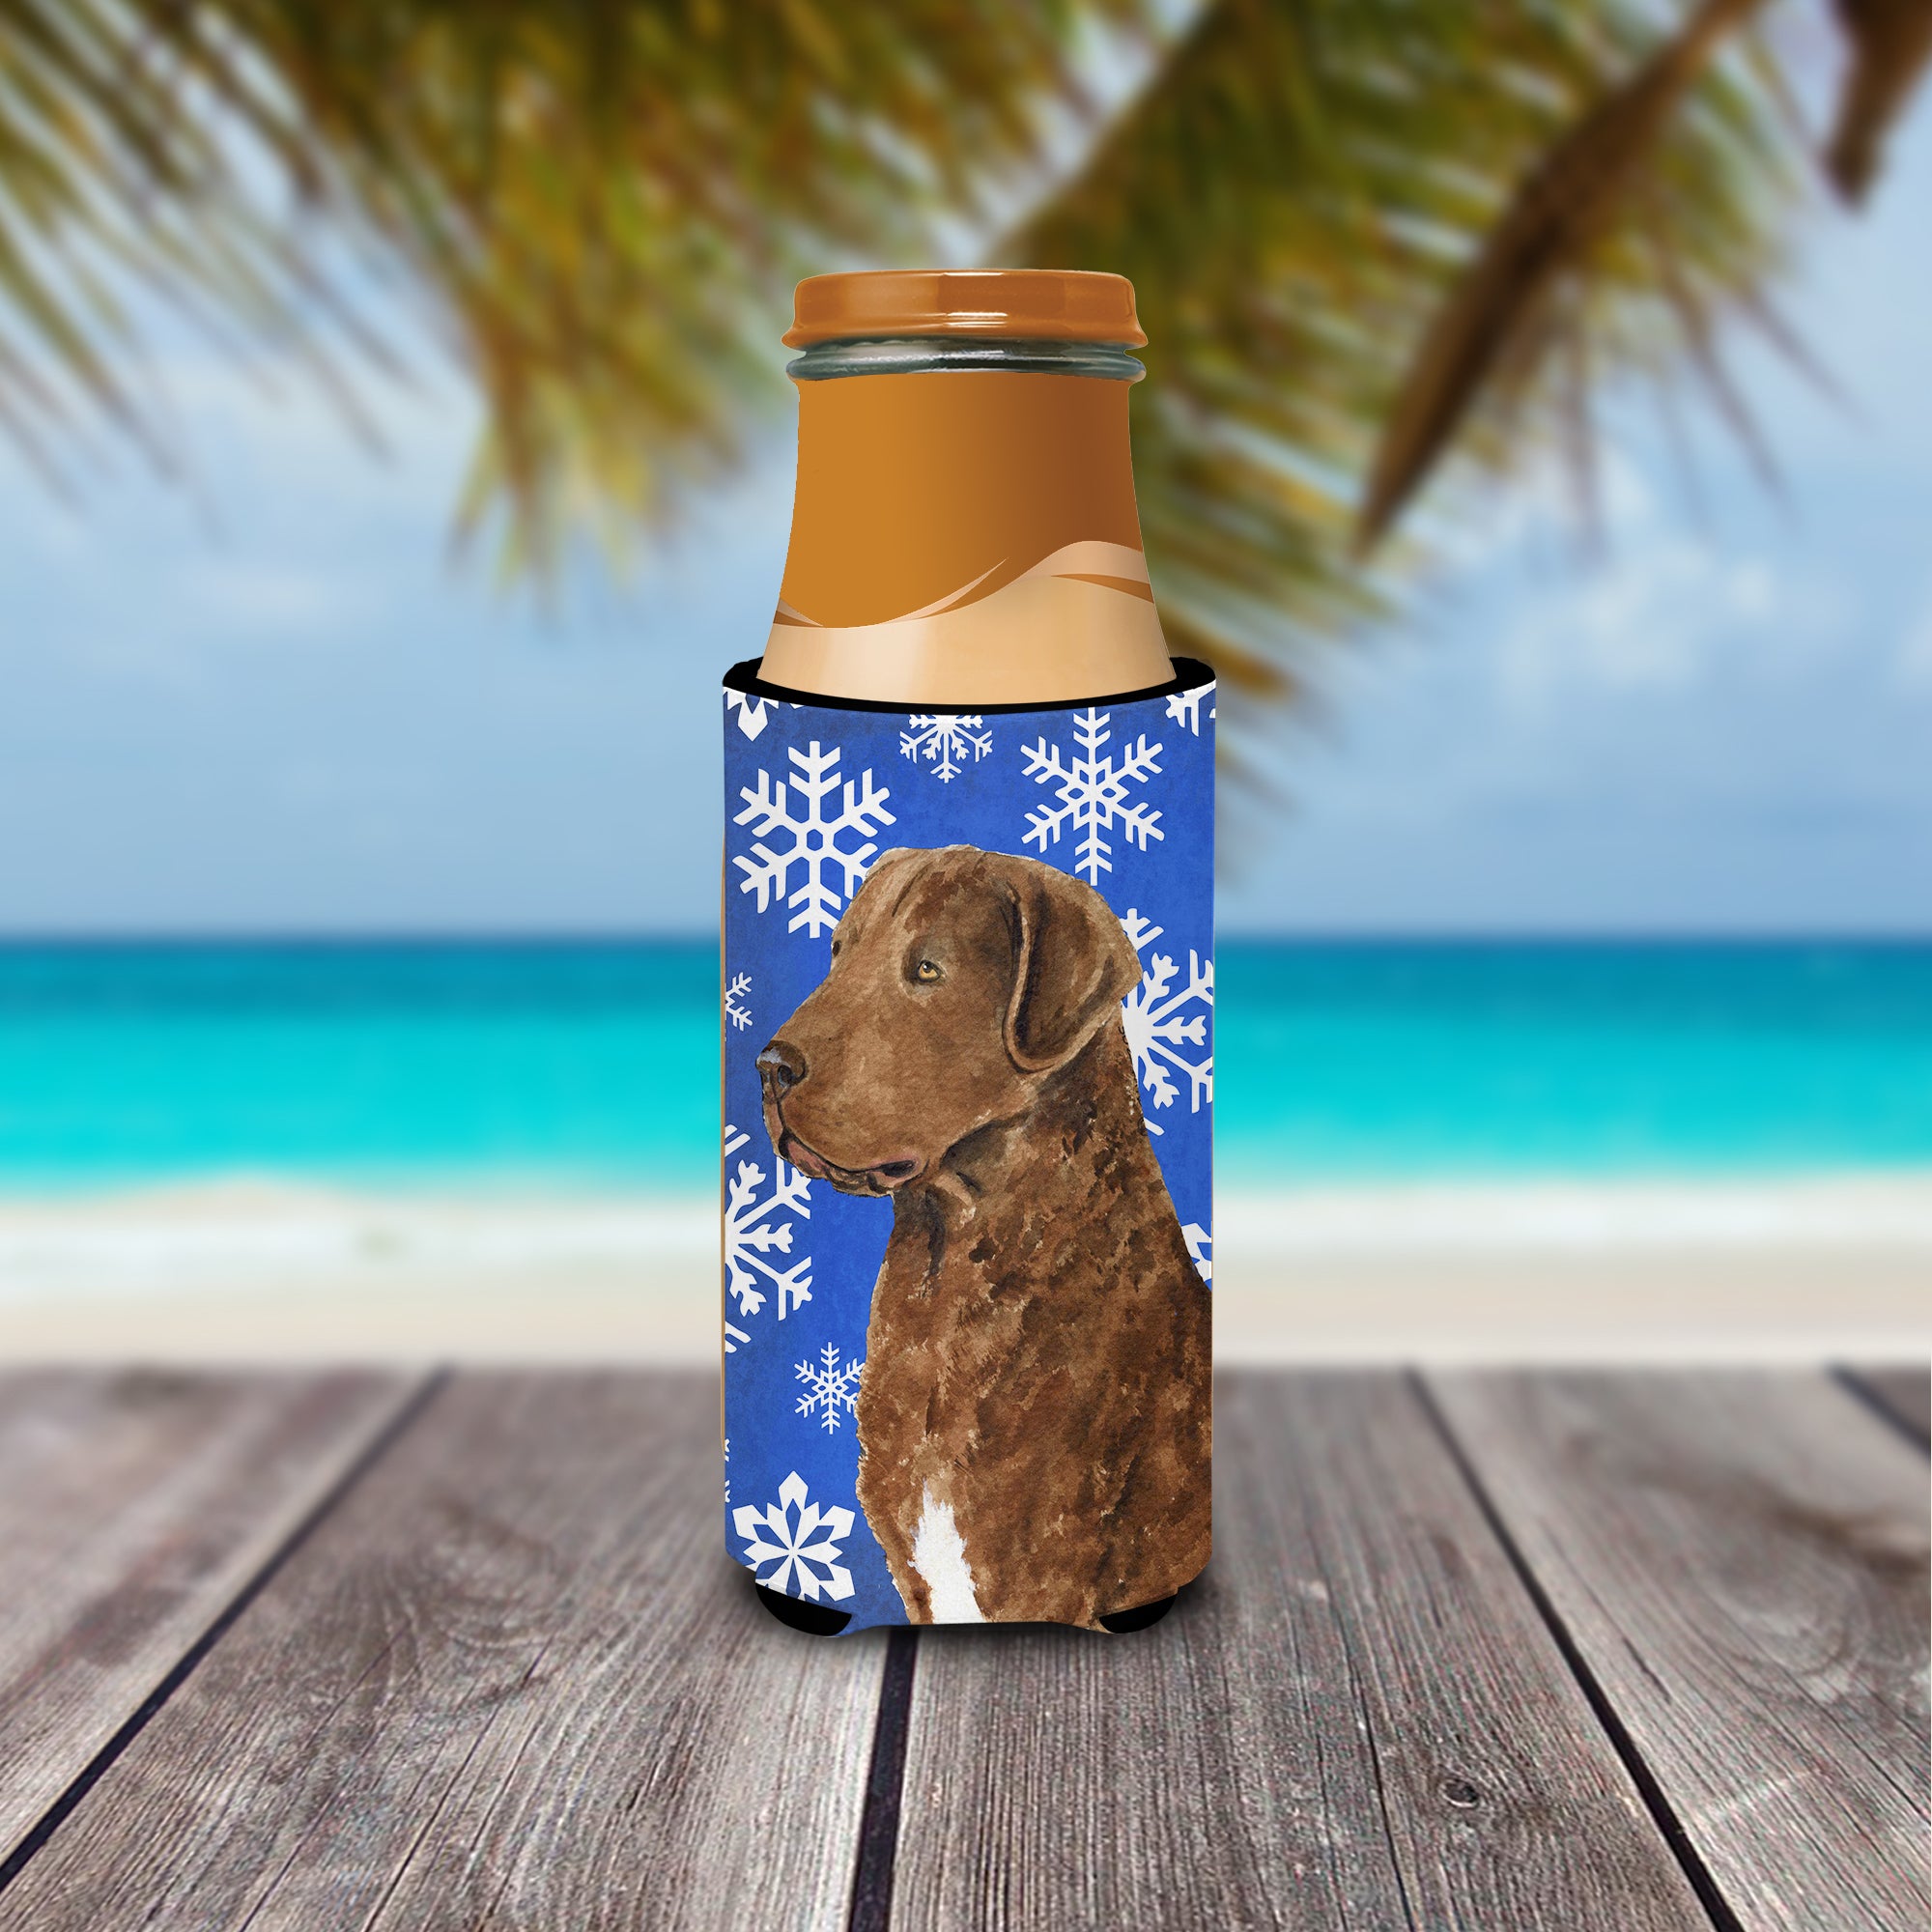 Chesapeake Bay Retriever Winter Snowflakes Holiday Ultra Beverage Insulators for slim cans SS4669MUK